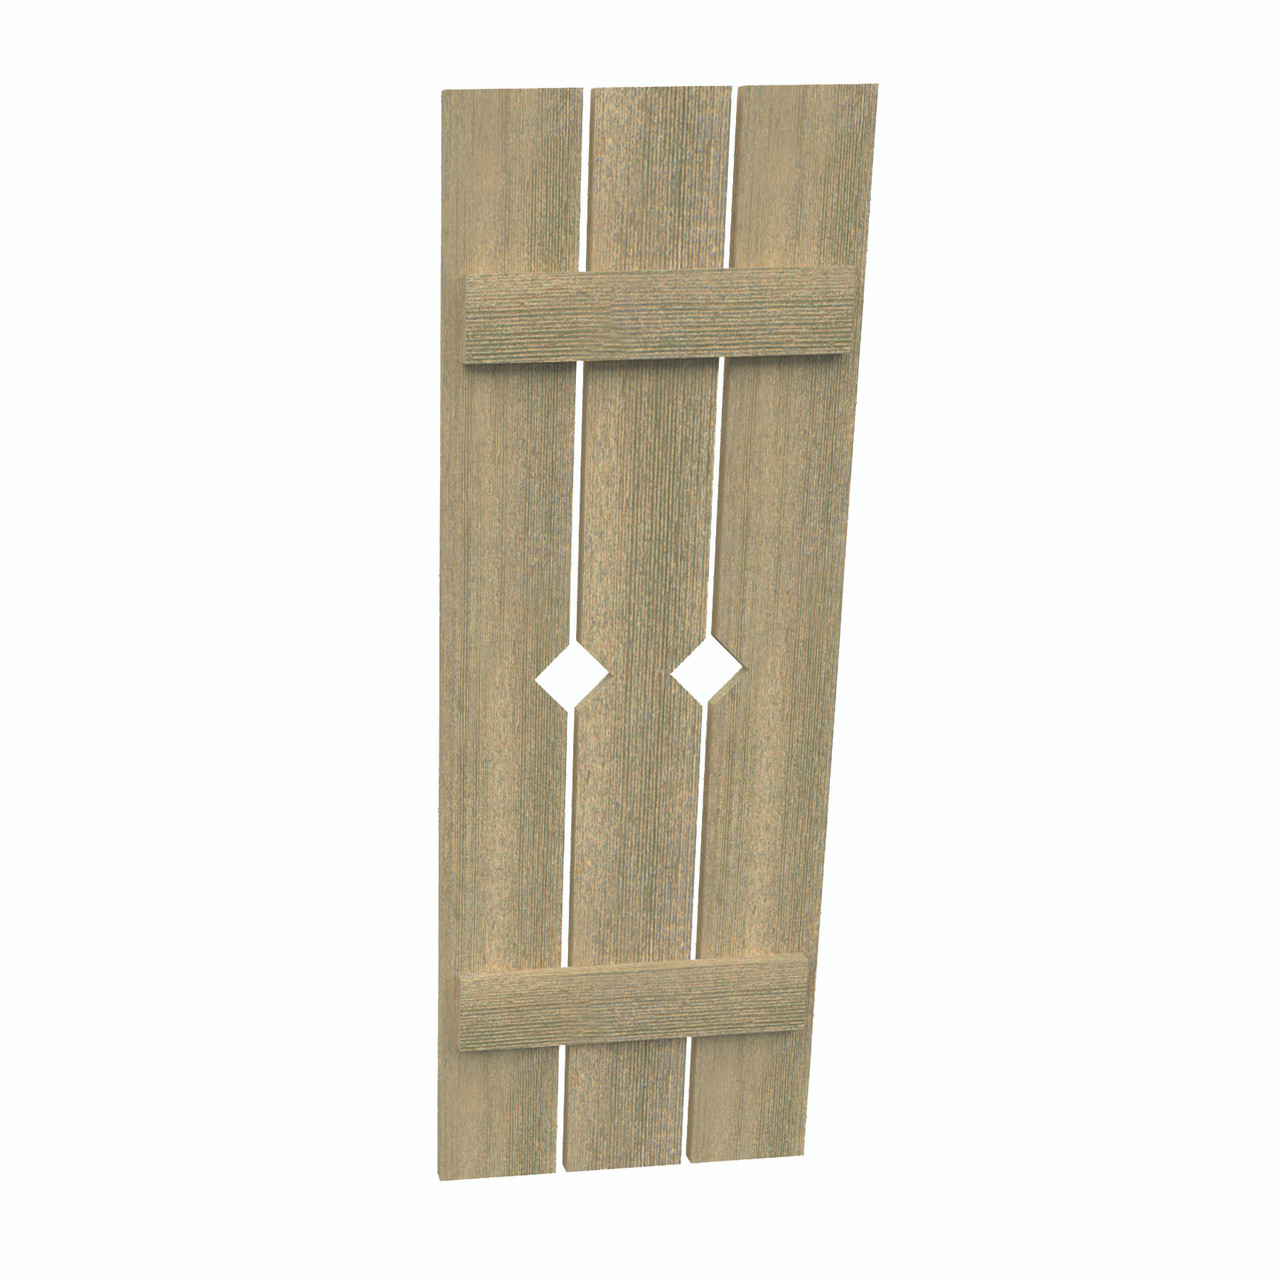 18 inch by 94 inch Plank Shutter with 3-Plank, Diamond